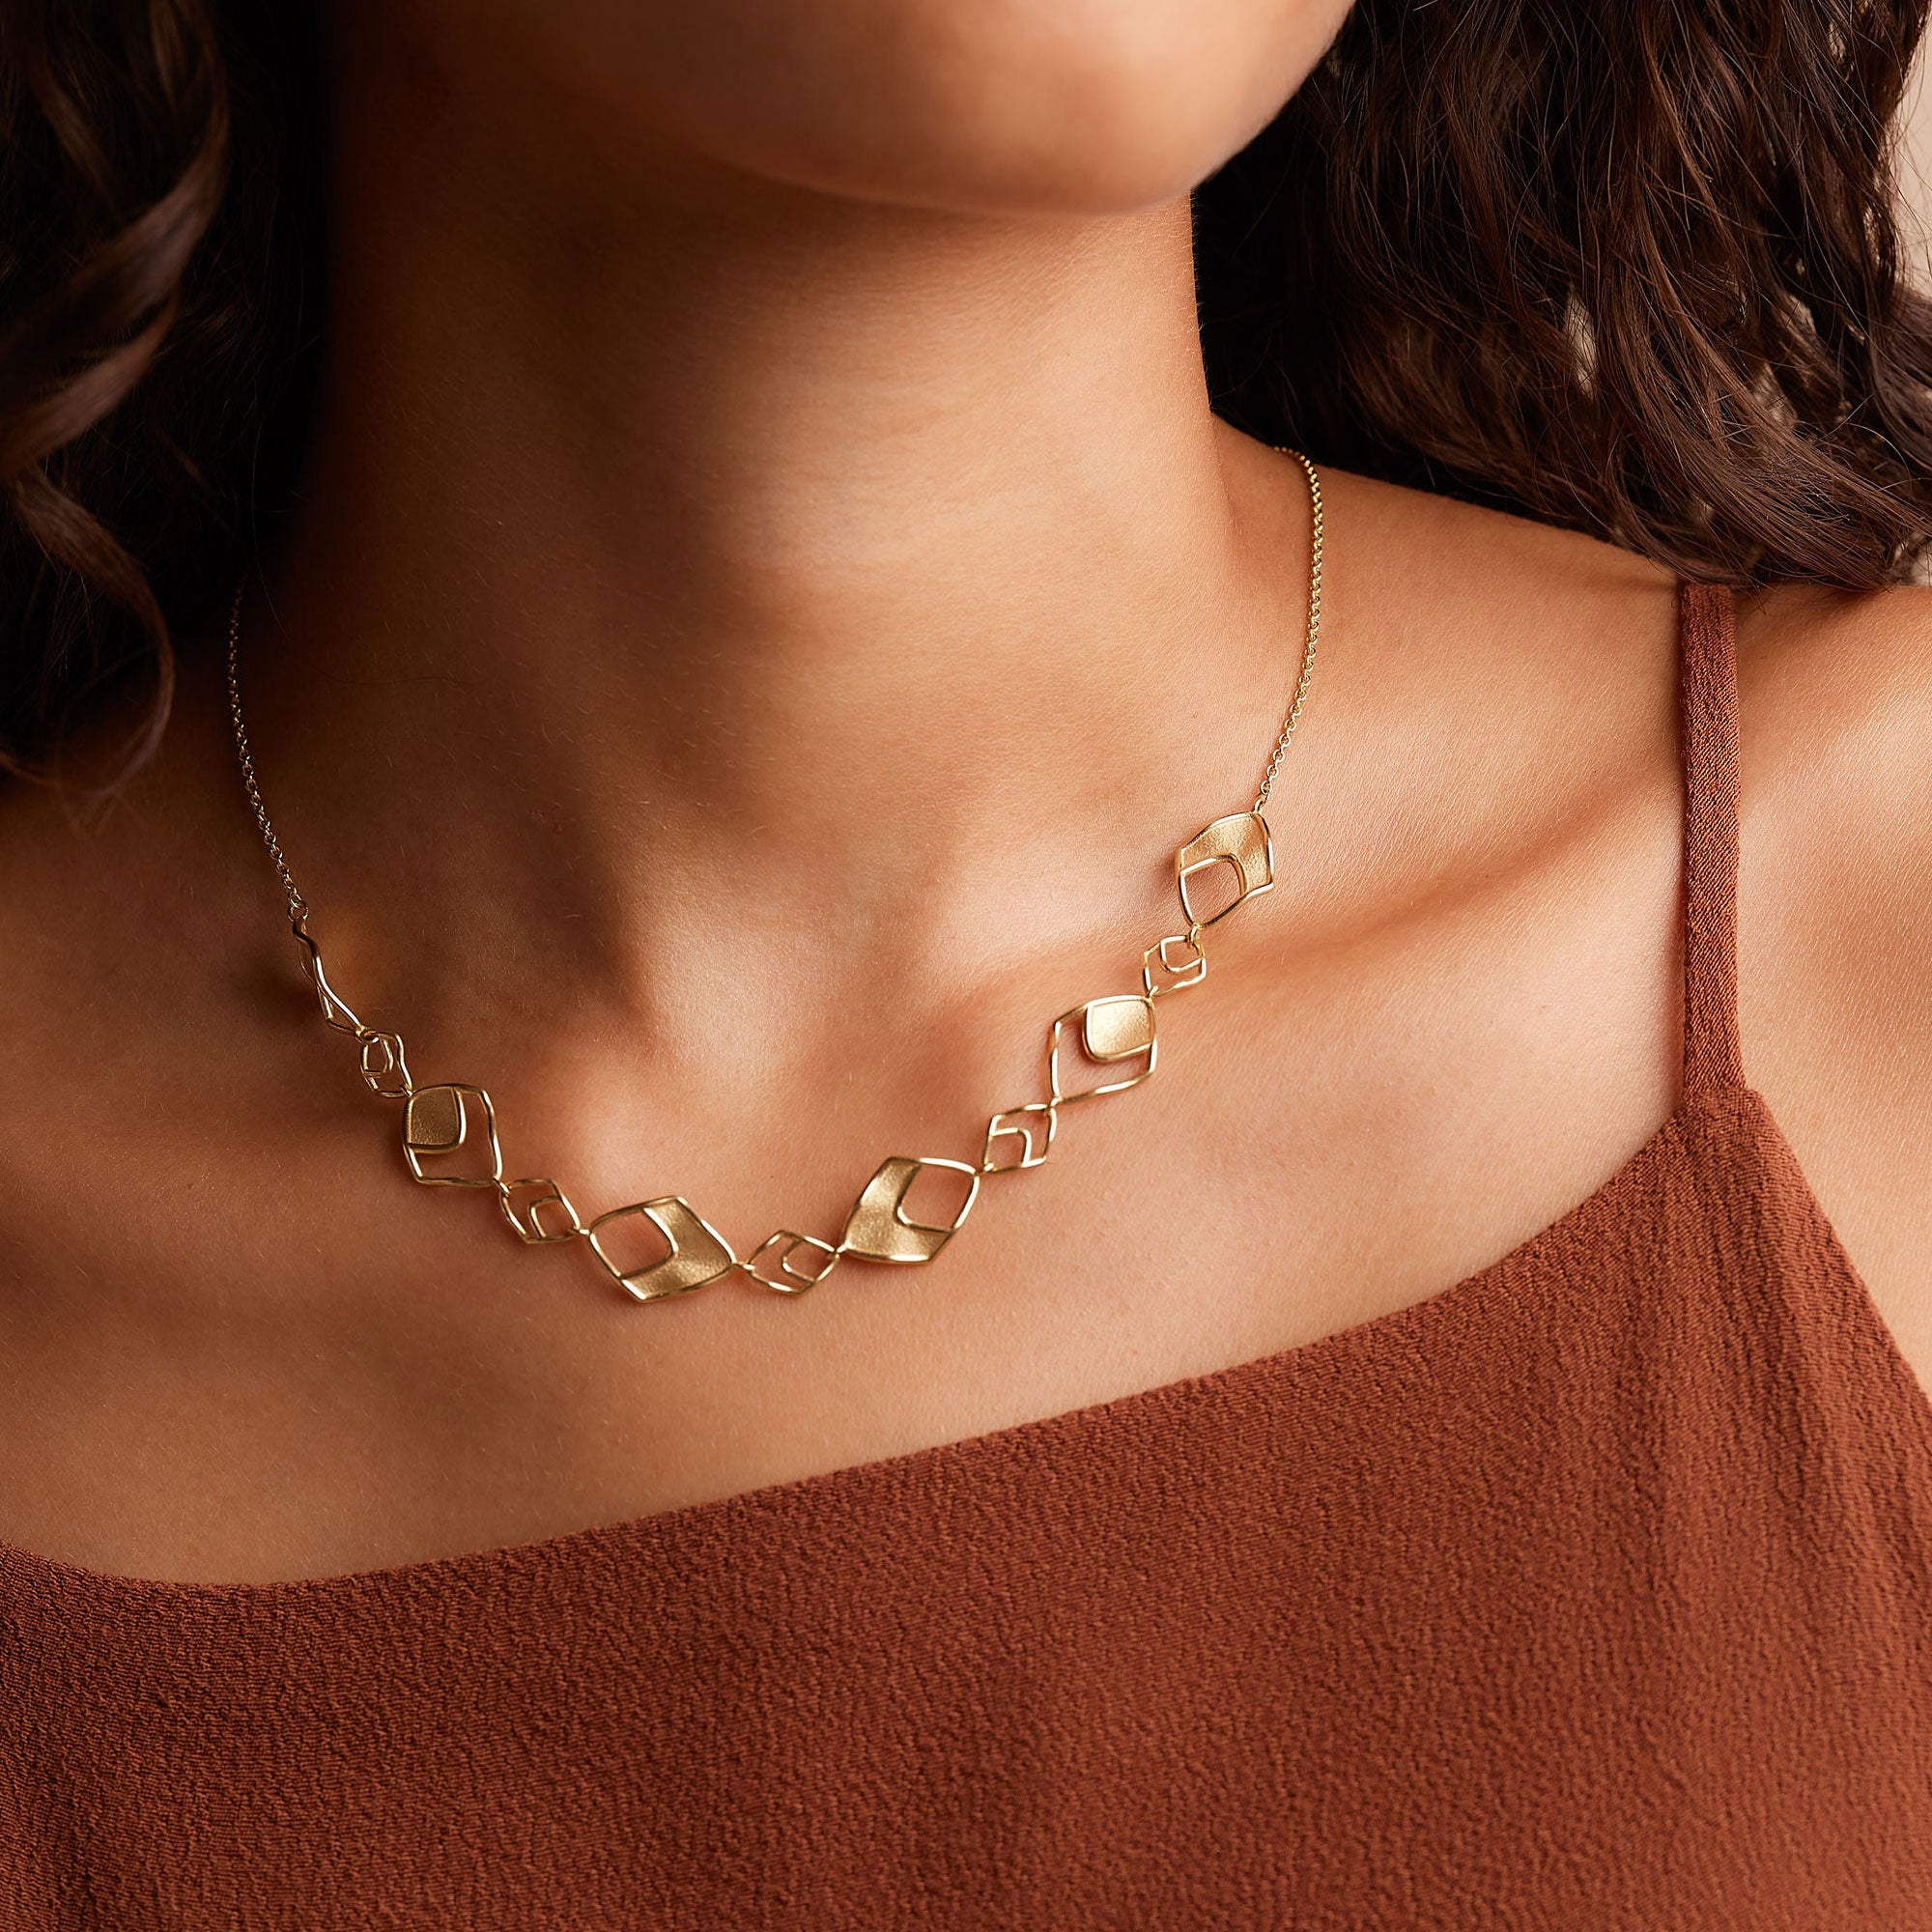 The Curve Linked Necklace in 18k Yellow Gold